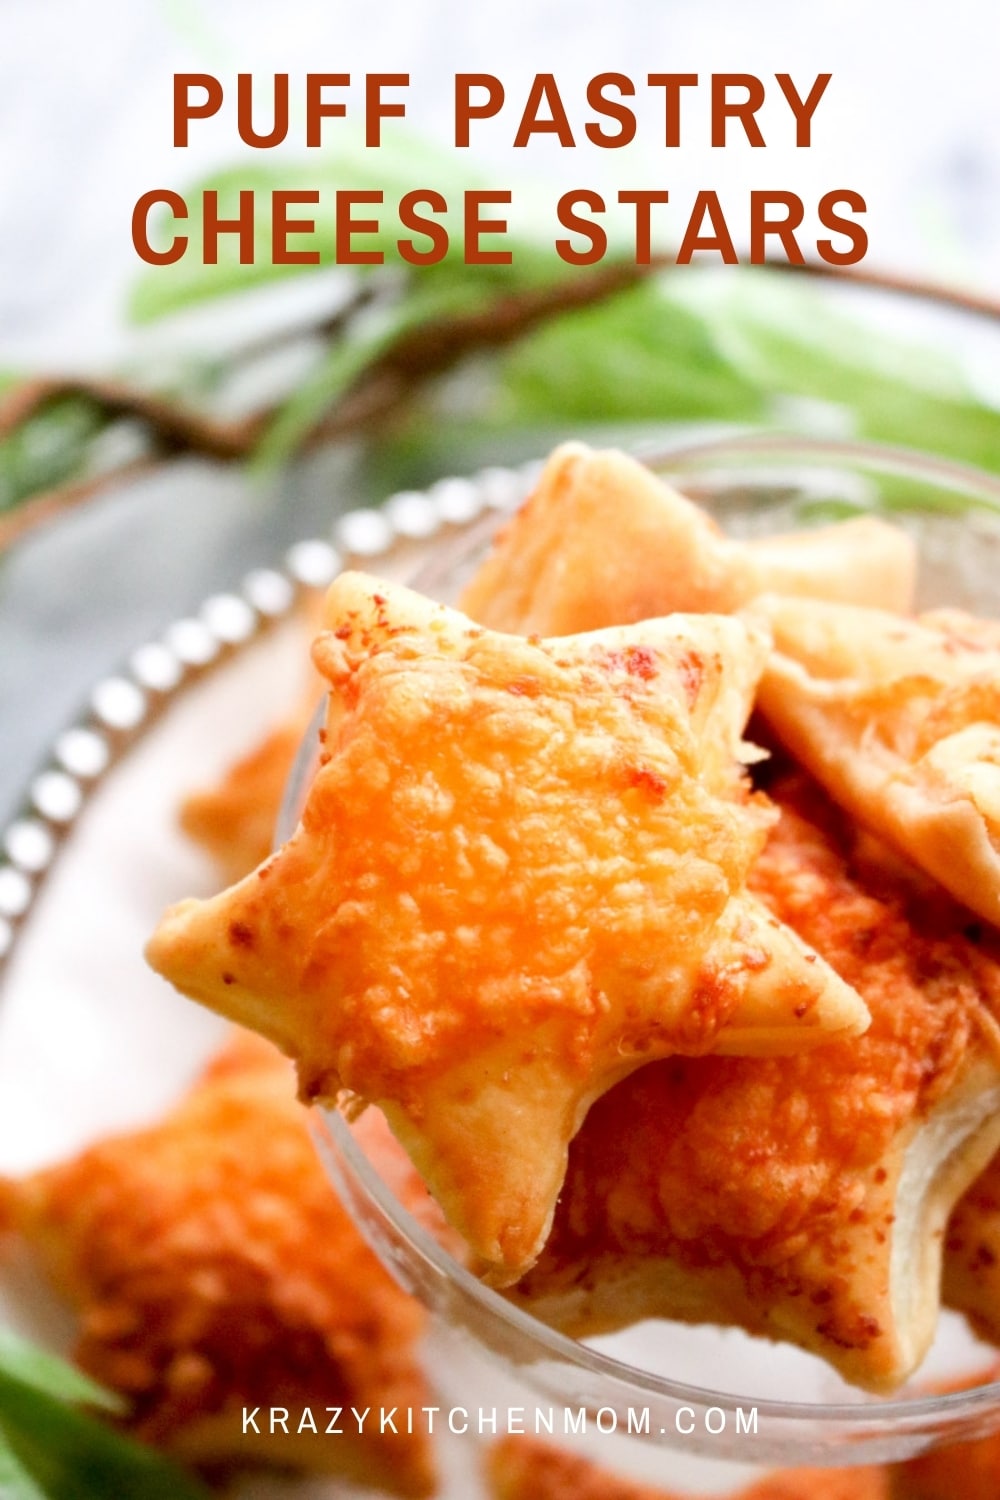 Puff Pastry Cheese Stars are an easy snack that anyone can make. They are buttery and flakey and topped with just the right amount of baked cheese.  via @krazykitchenmom